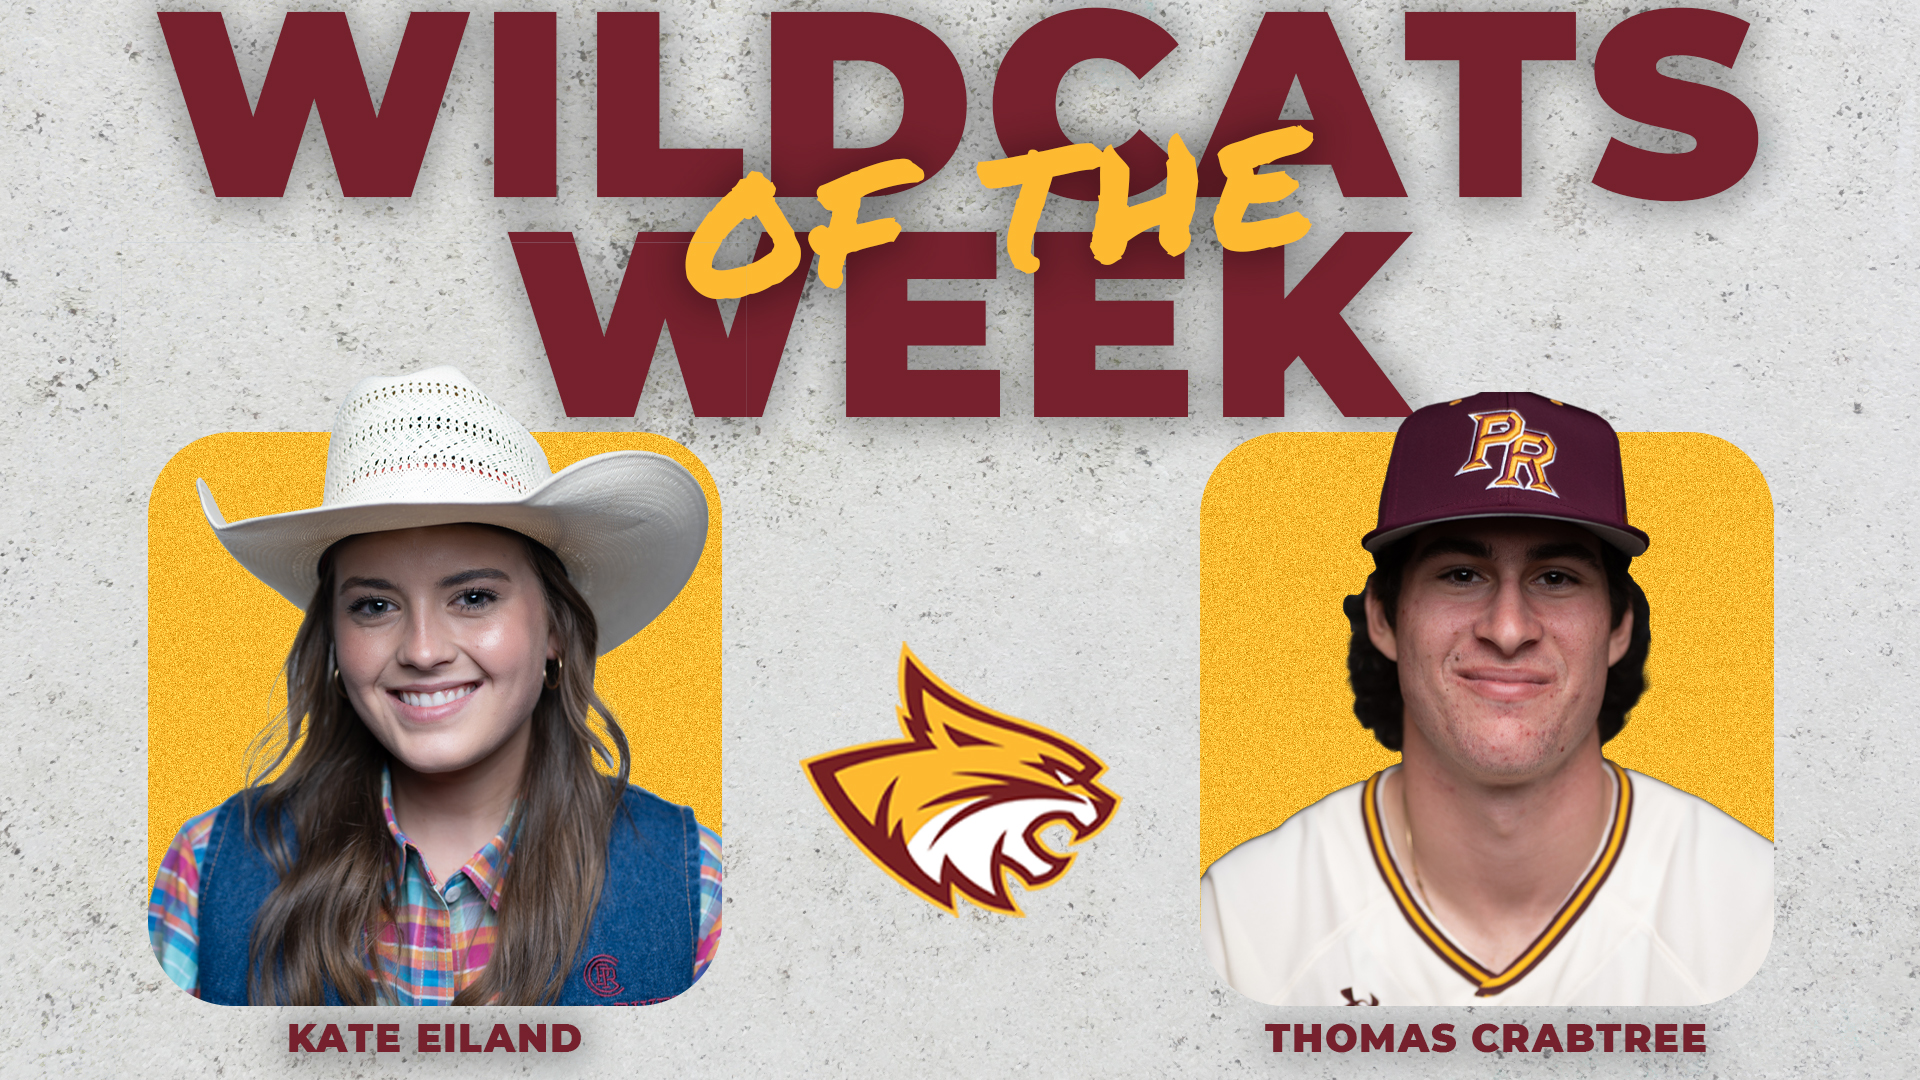 Kate Eiland, Thomas Crabtree named Wildcats of the Week